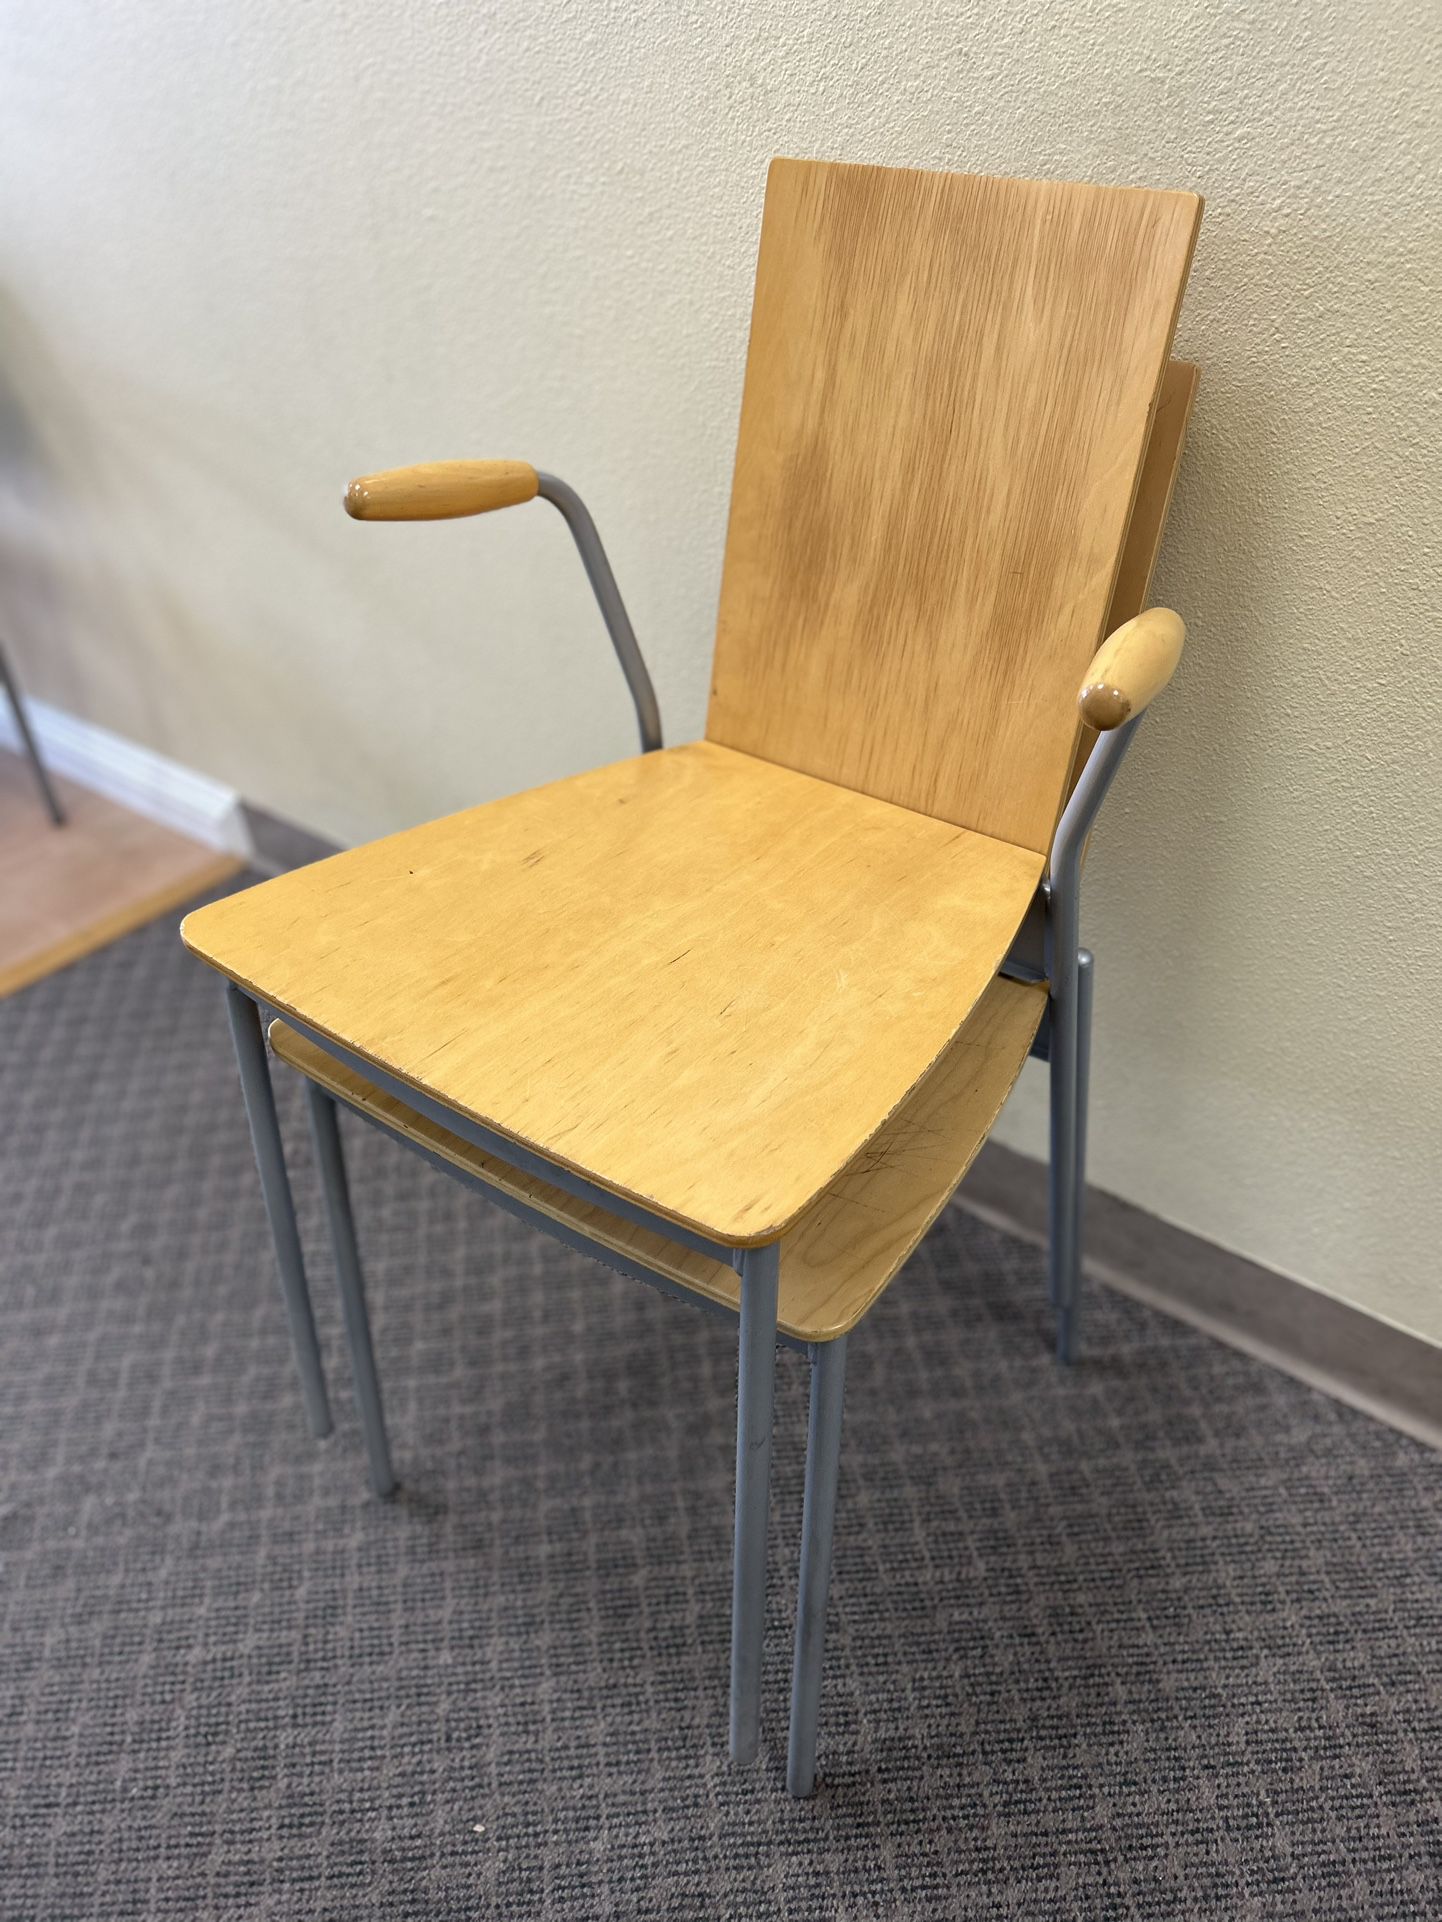 Wooden Chair Set, One chair with arm rest, metal legs